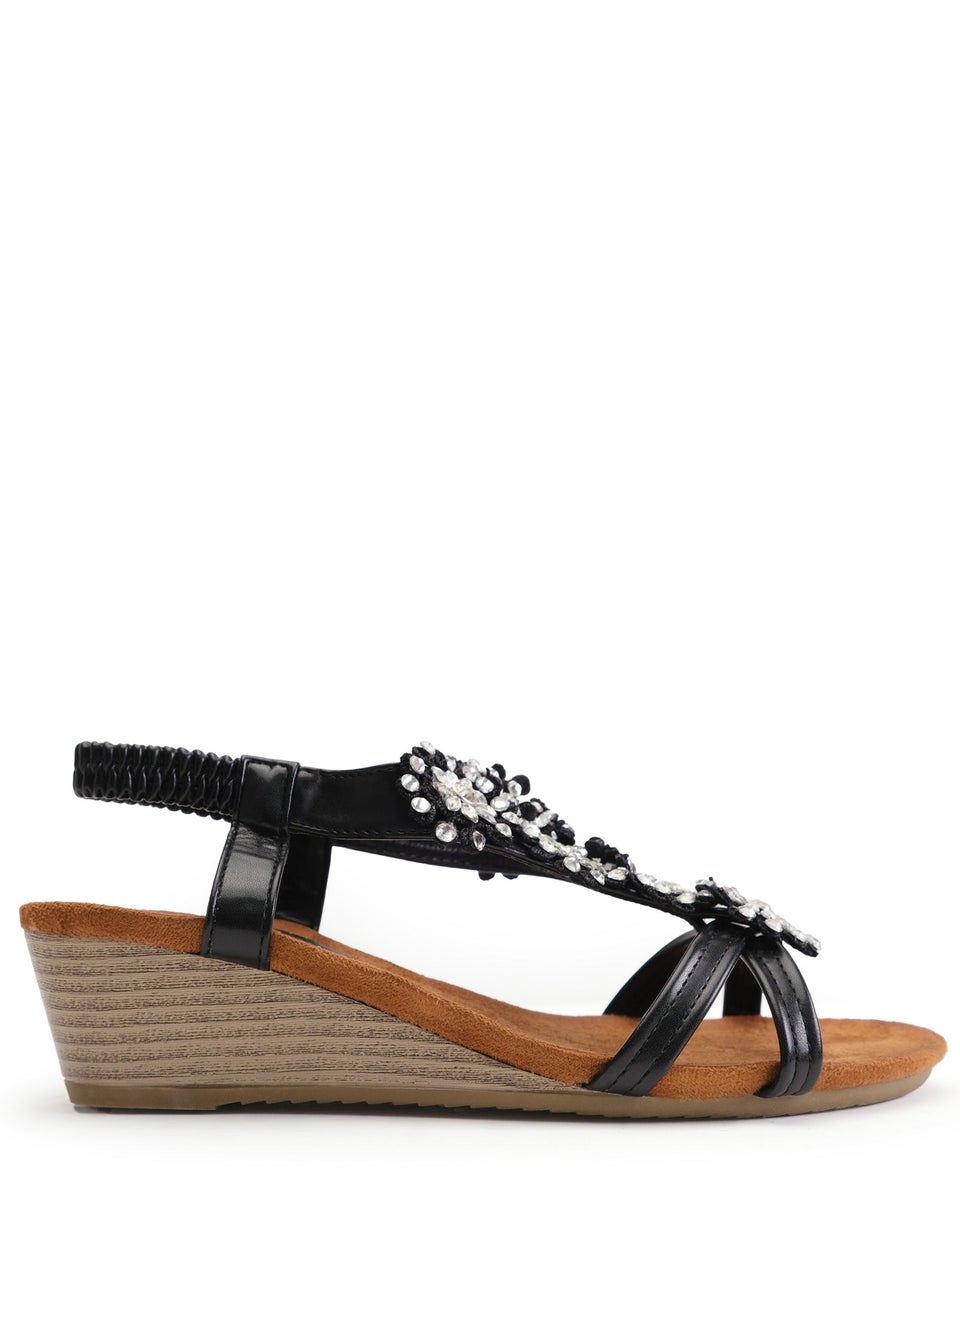 Where's That From Black Pu Cevedo Low Wedge Heeled Sandals